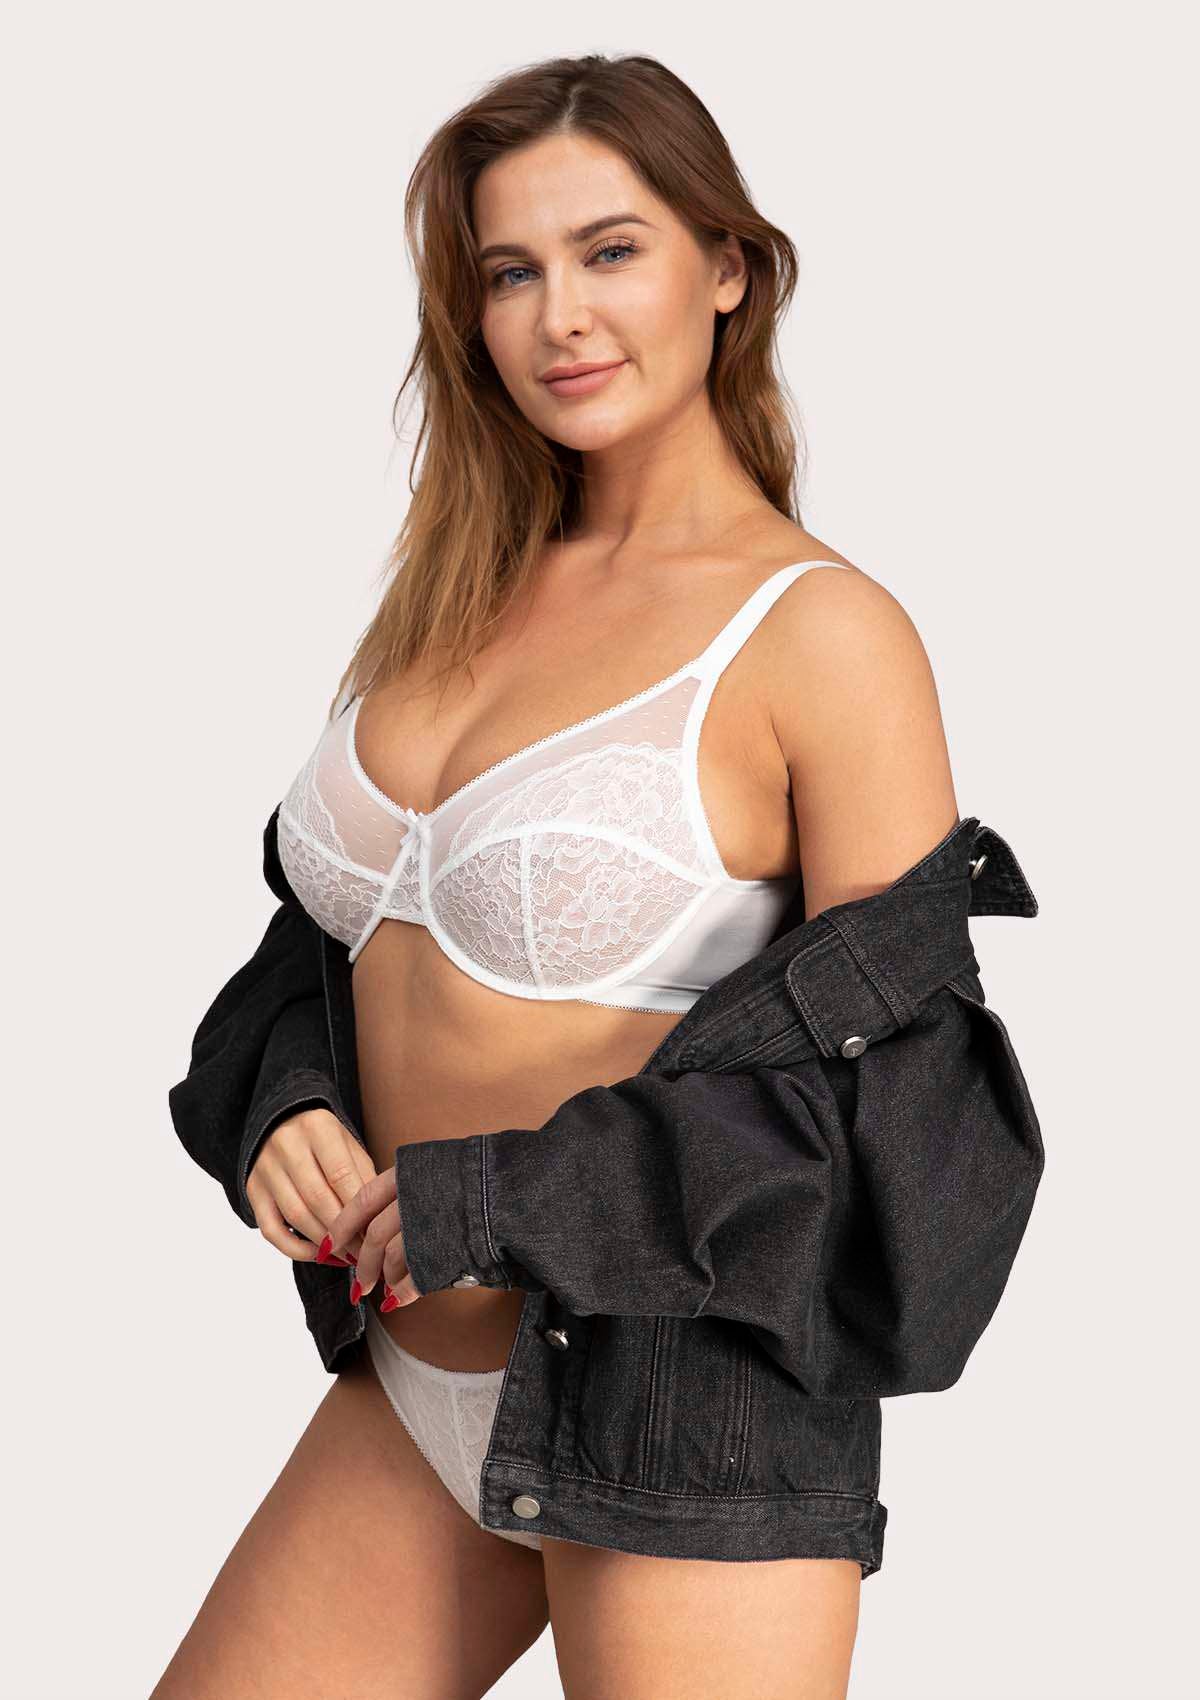 HSIA Enchante Lace Bra And Panties Set: Bra For Side And Back Fat - White / 42 / G